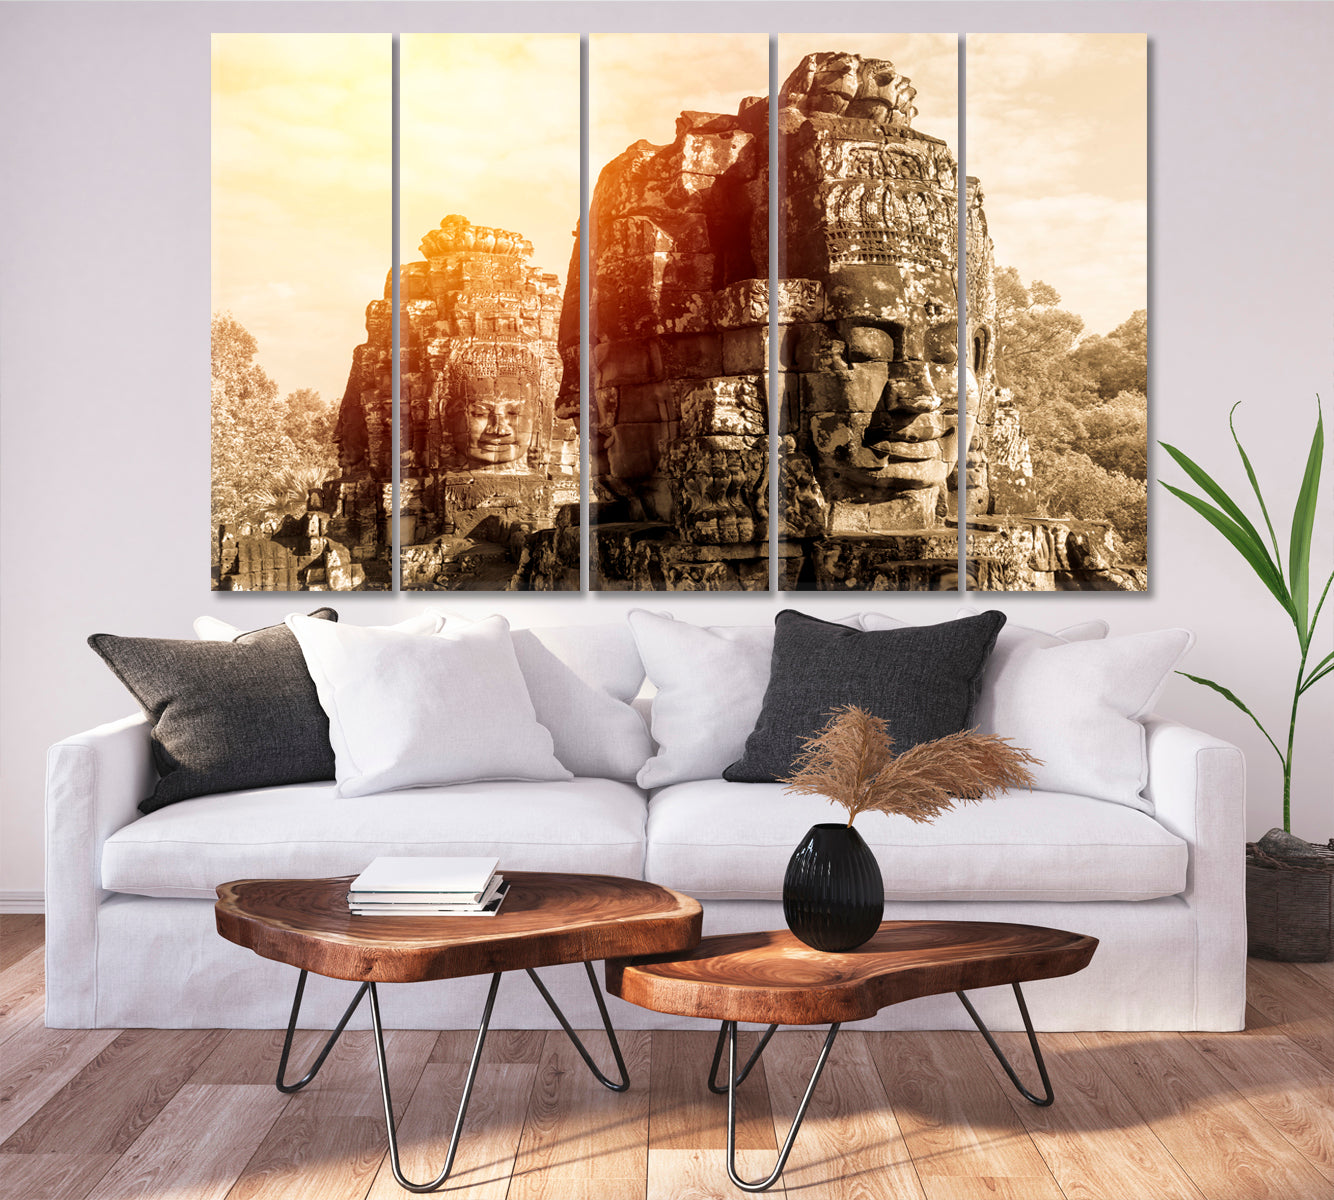 Ancient Bayon Castle Angkor Thom Cambodia Vintage Style Canvas Print Religious Modern Art Artesty 5 panels 36" x 24" 